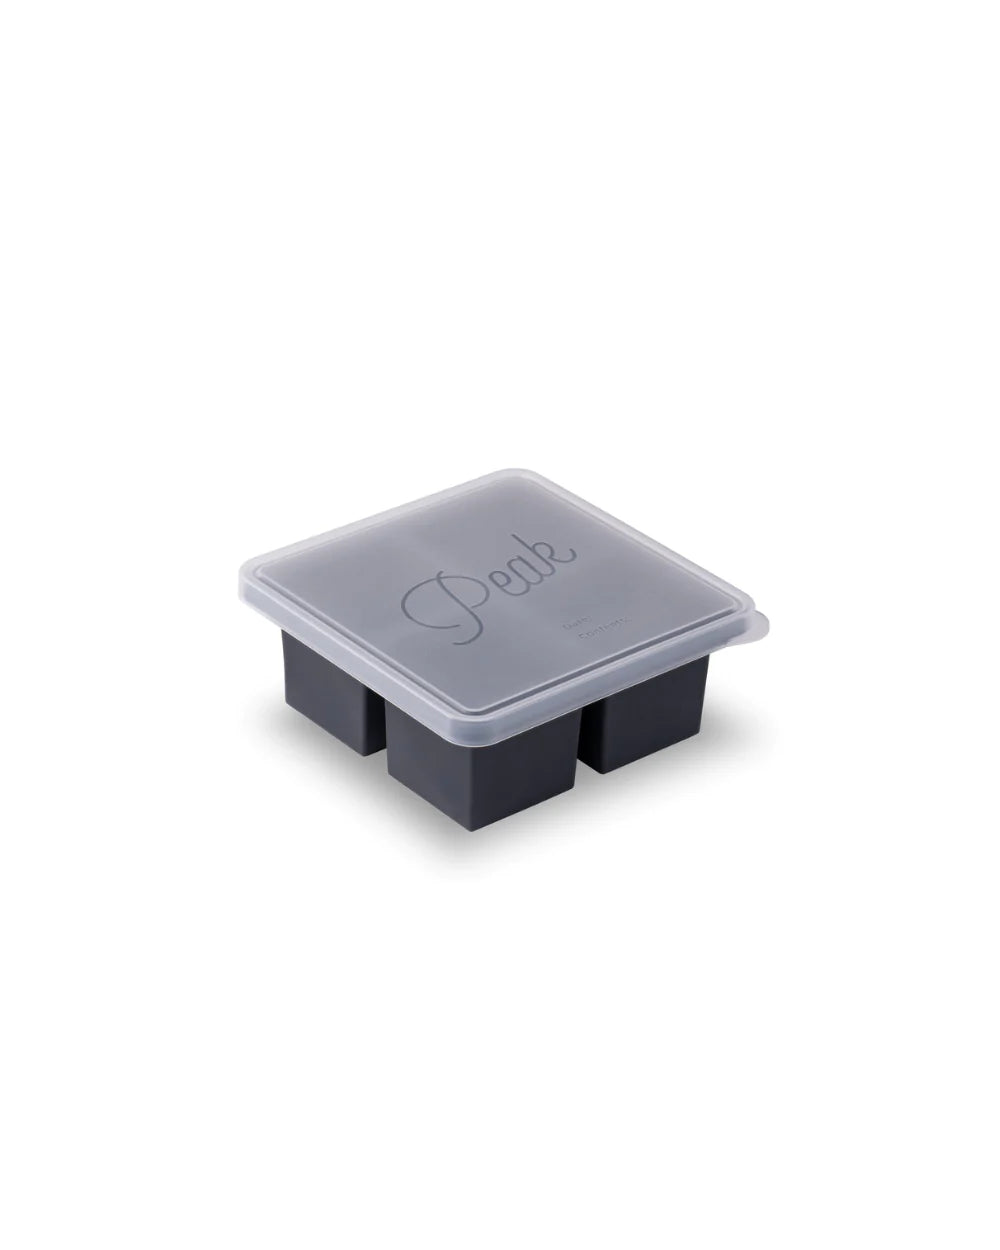 w&p Cup Cubes Freezer Tray - 4 Cubes, Charcoal